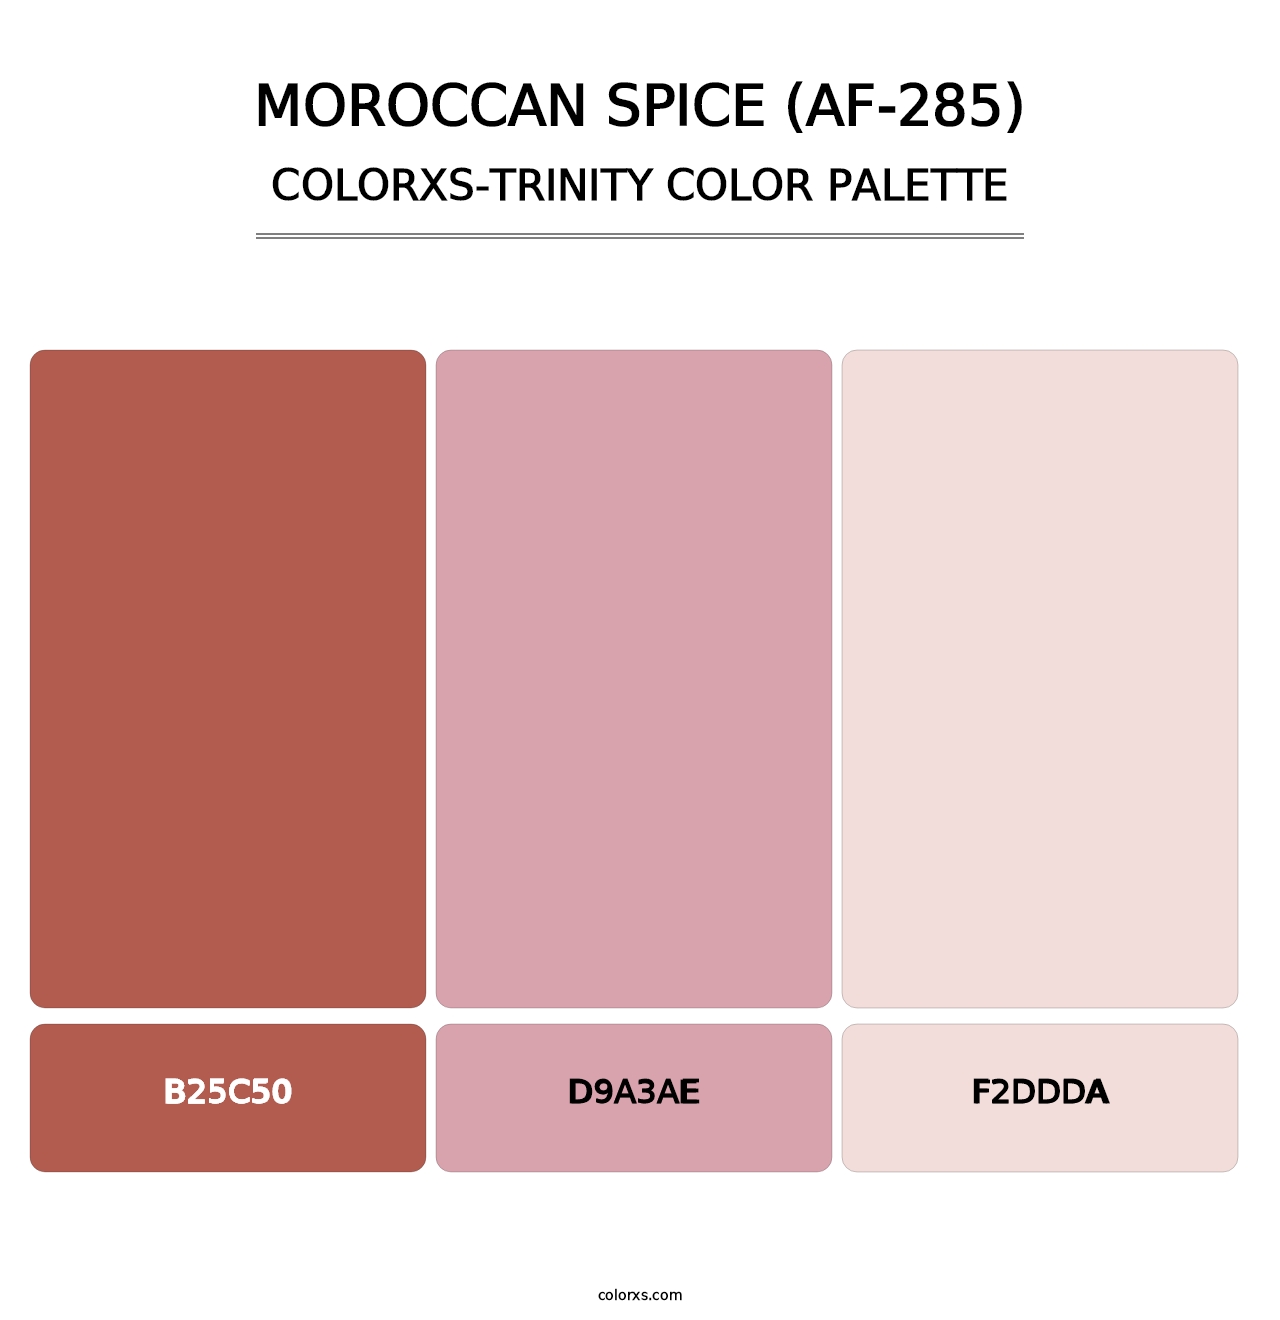 Moroccan Spice (AF-285) - Colorxs Trinity Palette